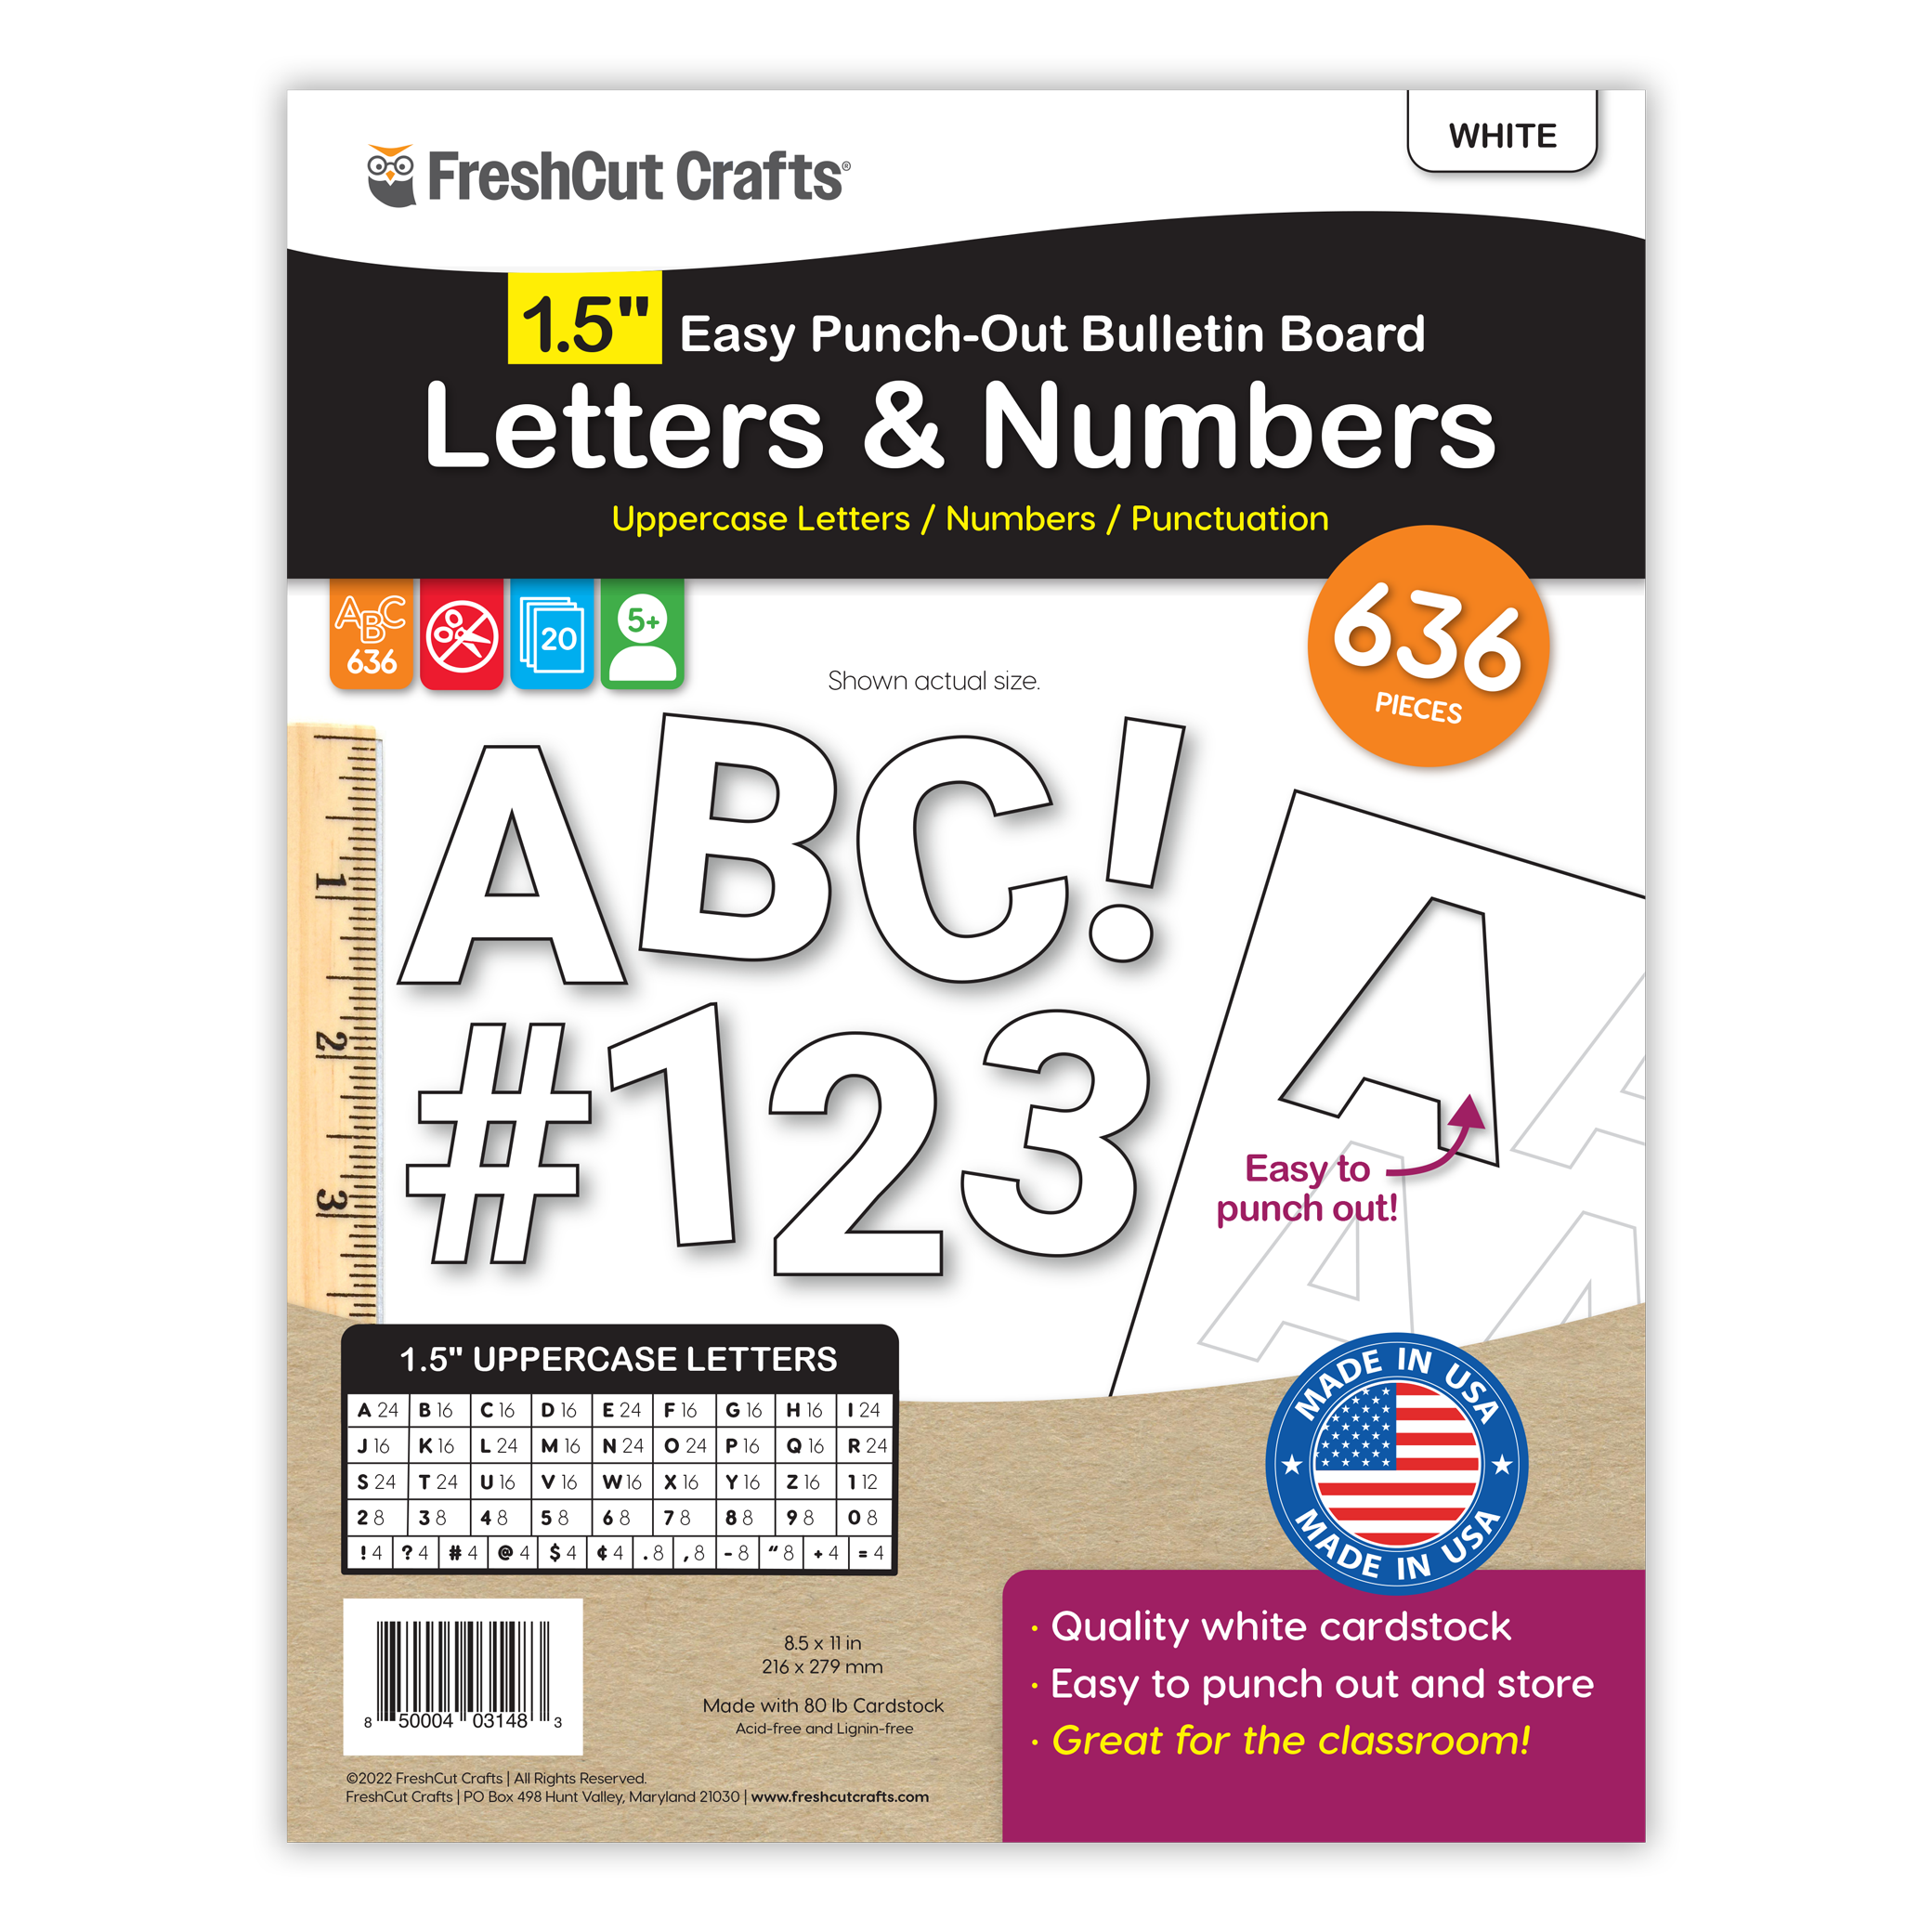 1.5 inch Letters & Numbers